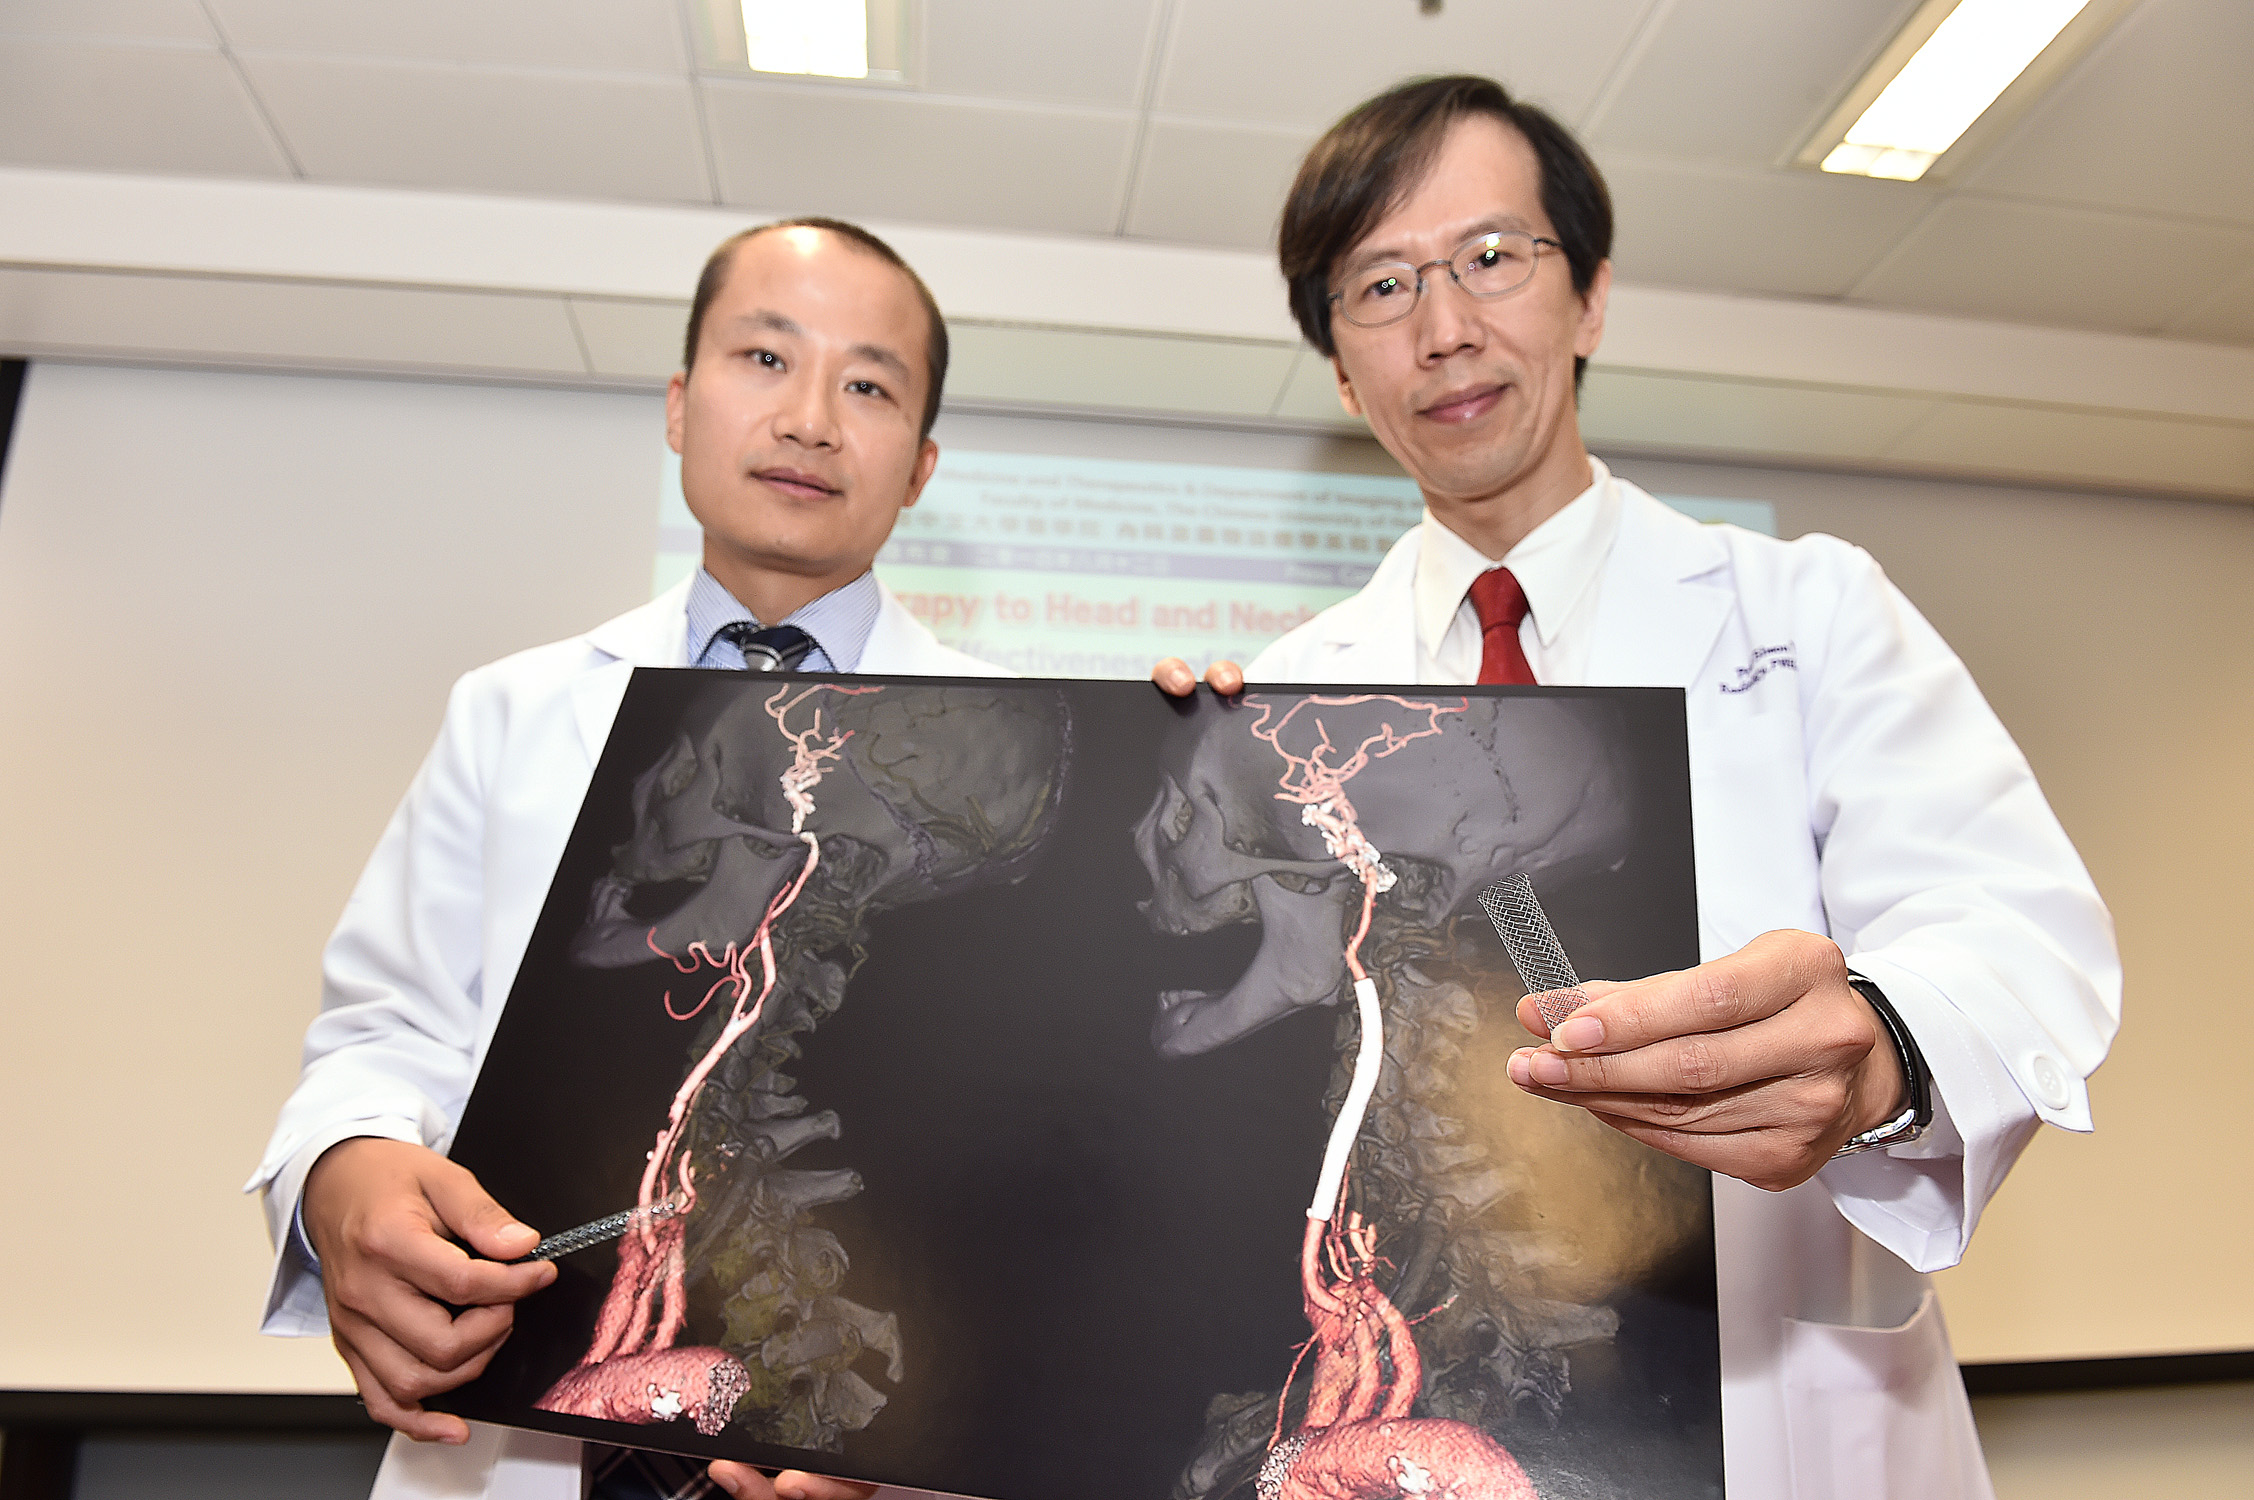 Dr. Thomas Leung (left), Lee Quo Wei Associate Professor of Neurology, Department of Medicine and Therapeutics